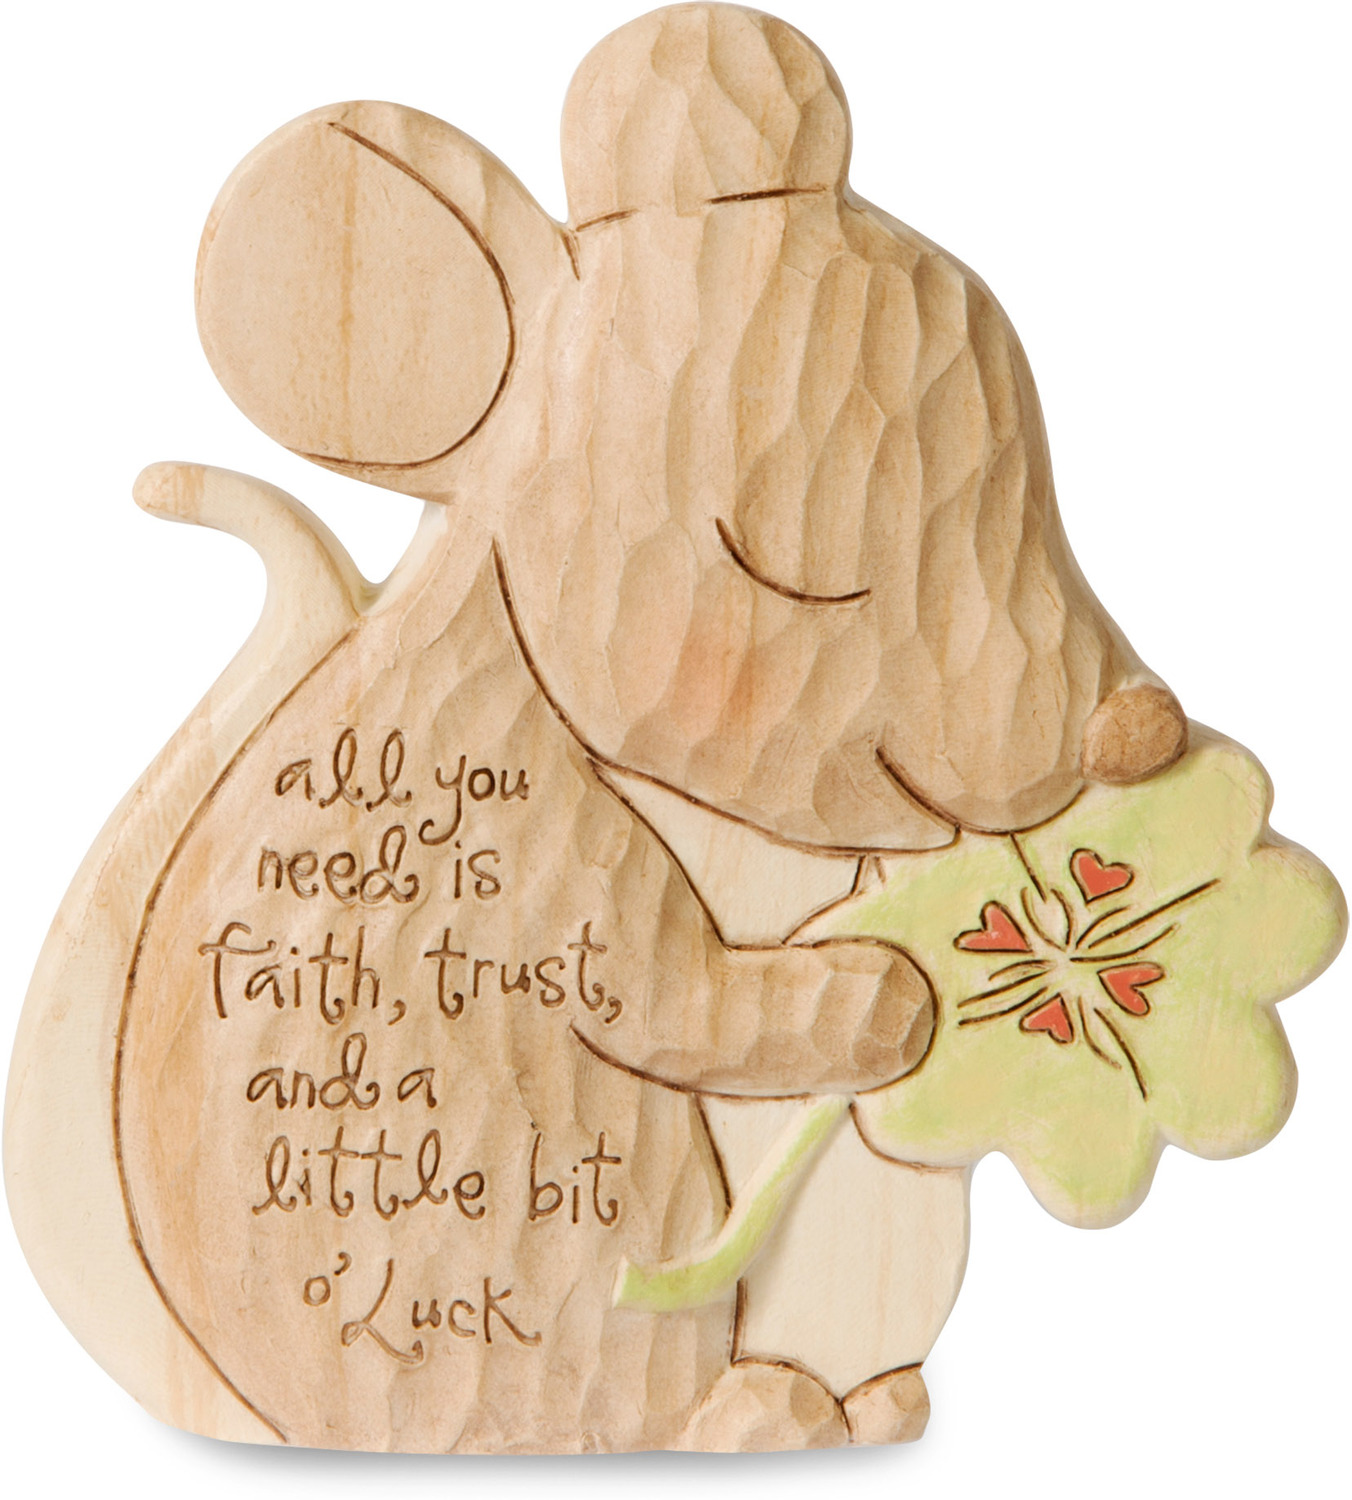 Little Bit O' Luck by Heavenly Woods - Small Painted Mouse Angel Figurine/Carving